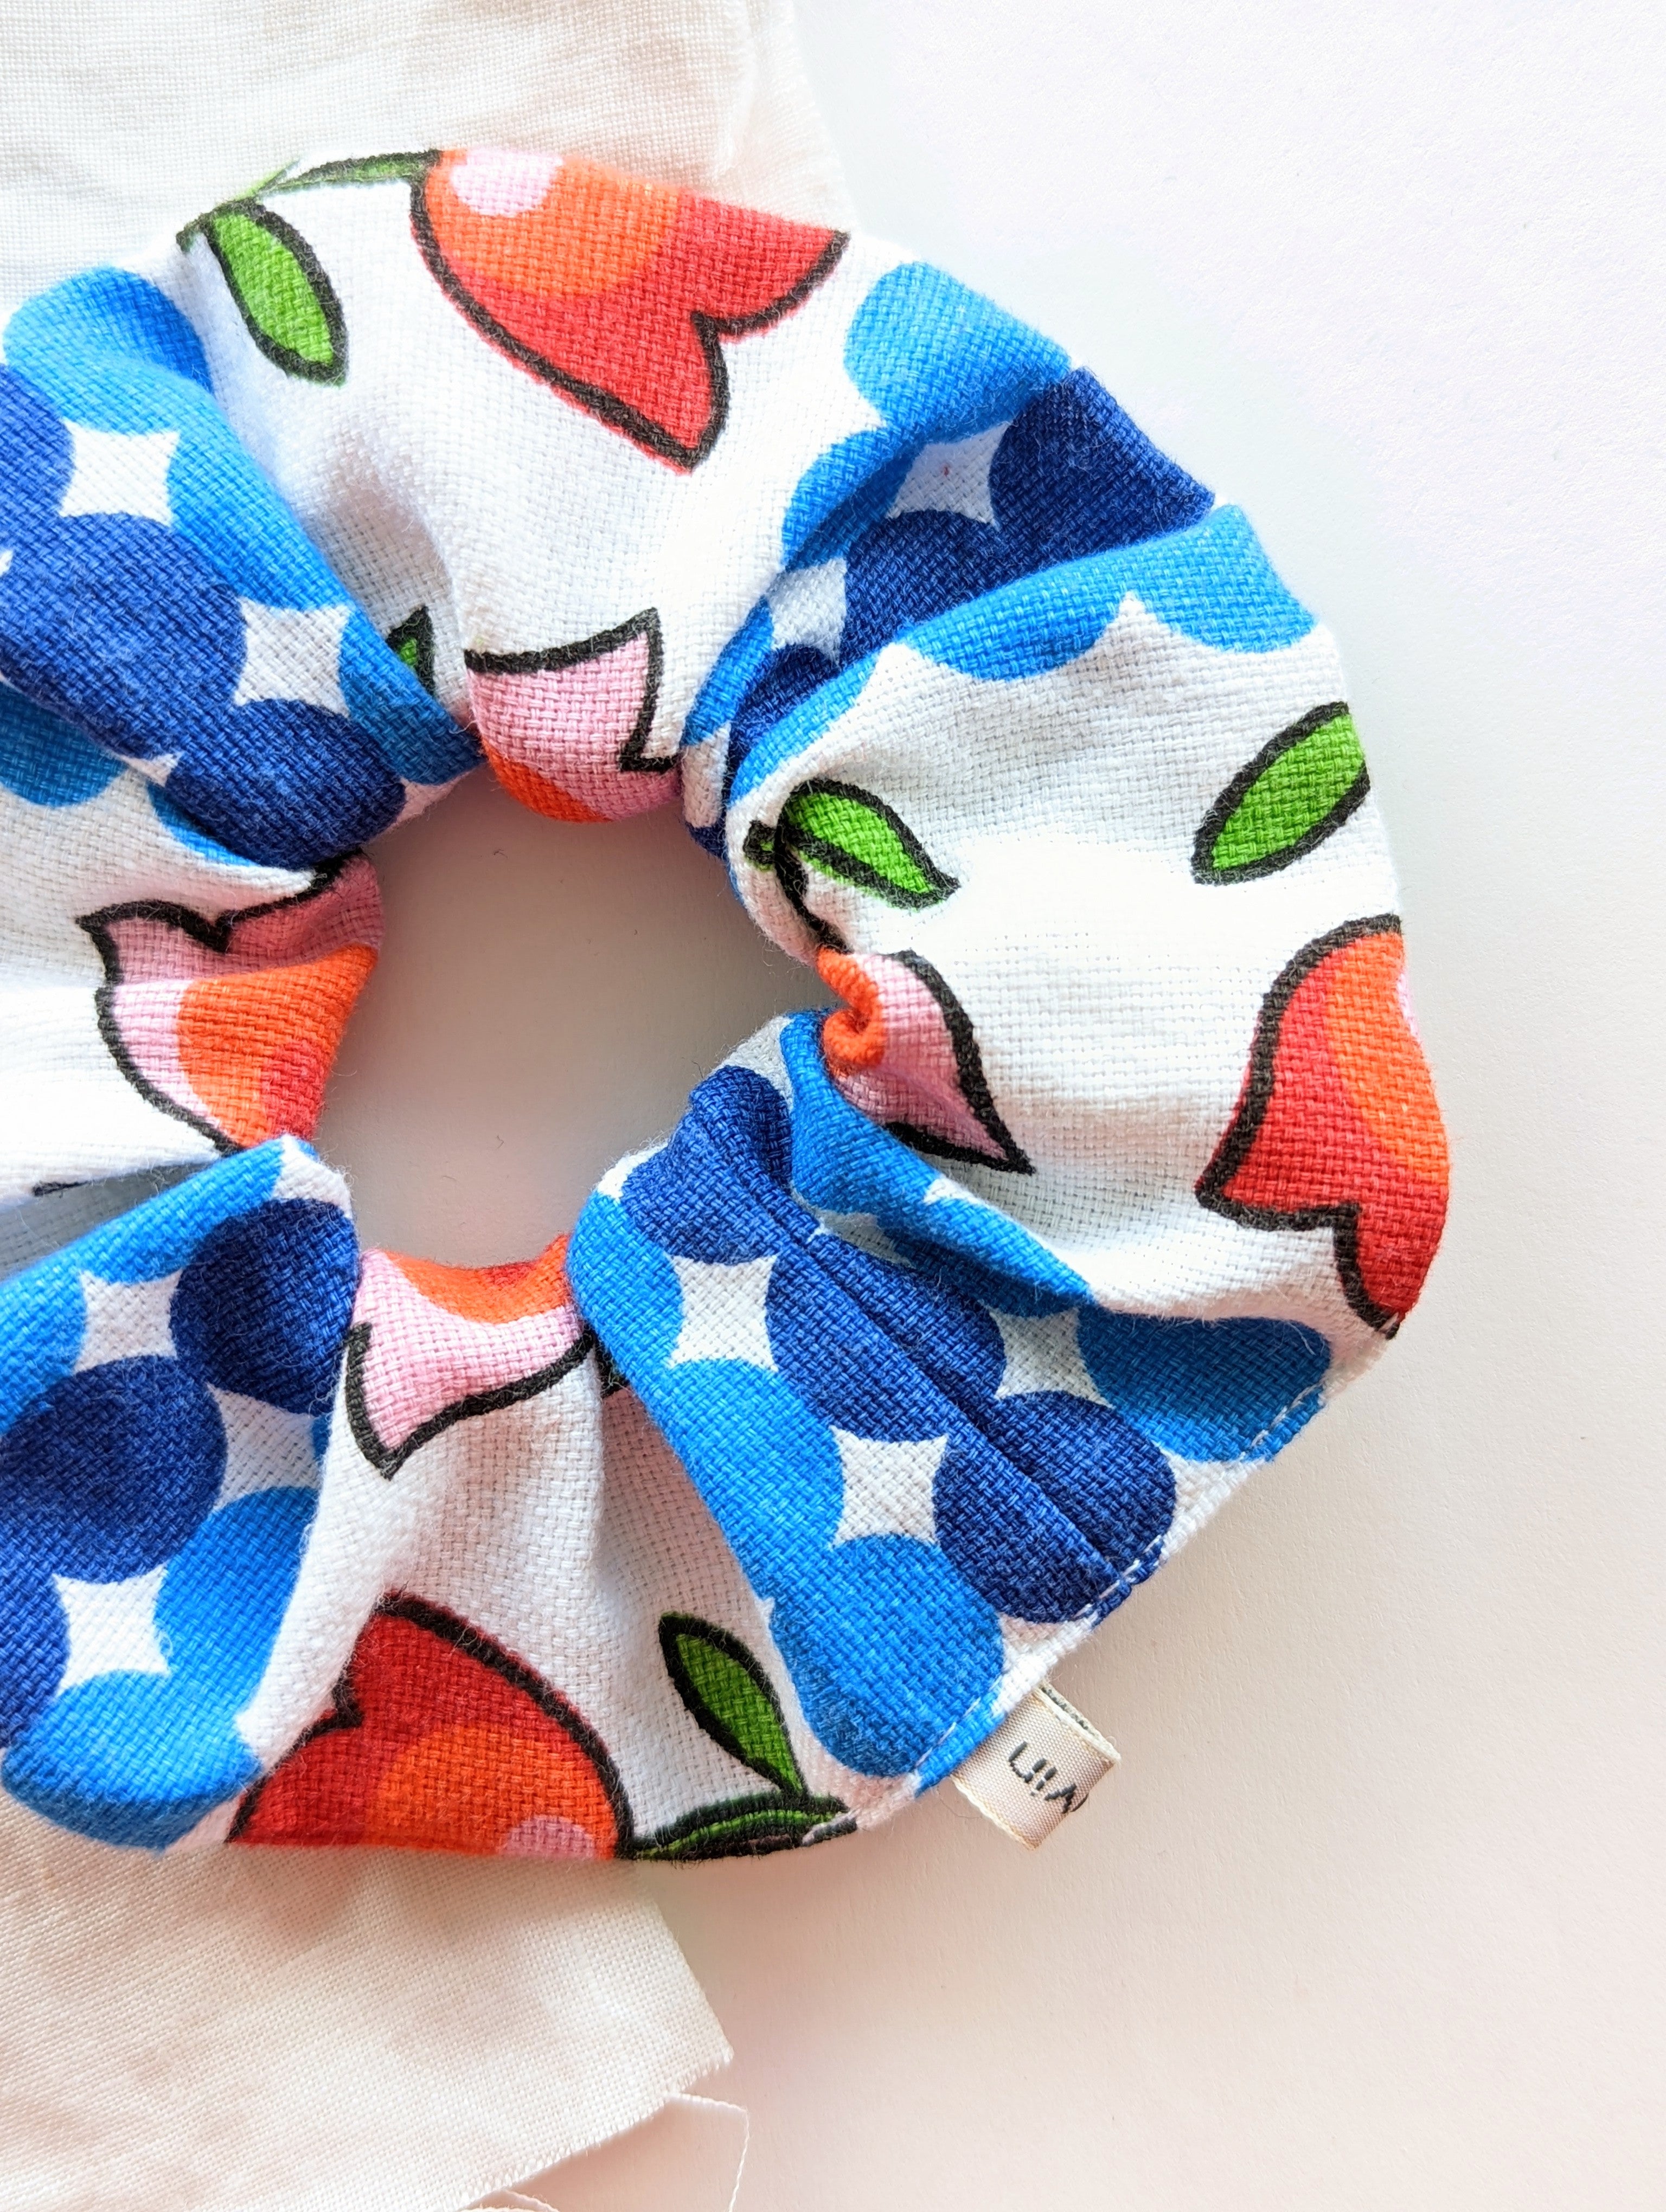 Scrunchie Heavin Upcycling Vintage Iconic Flower 70s